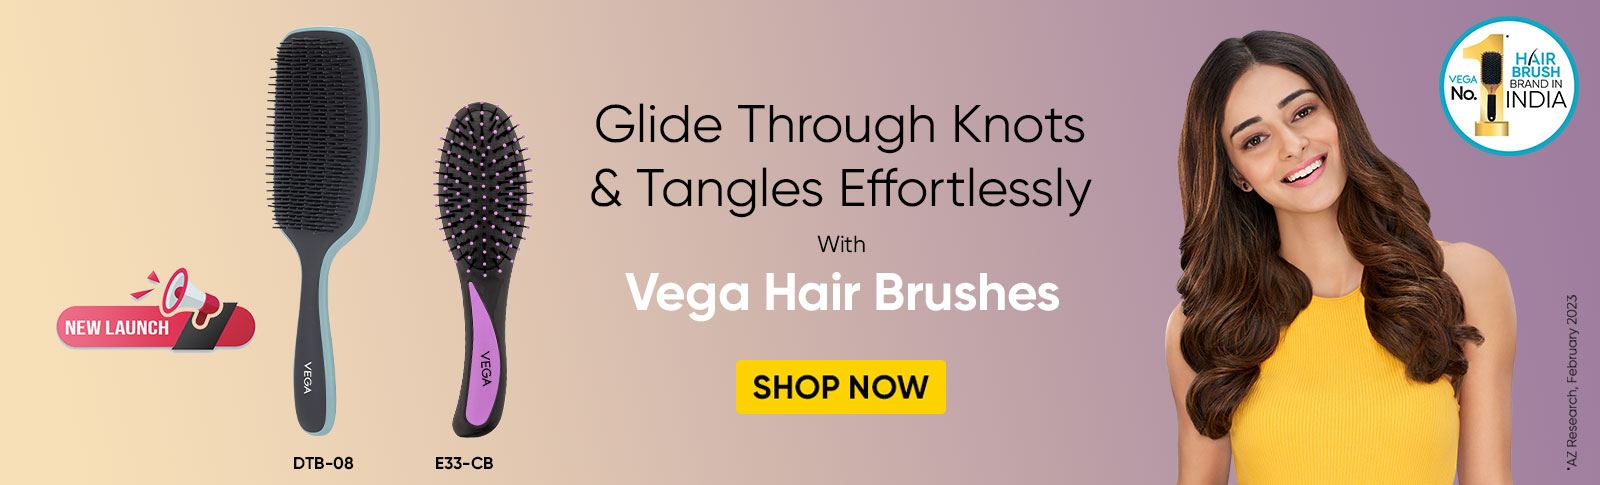 Glide through Knots and tangles effortlessly